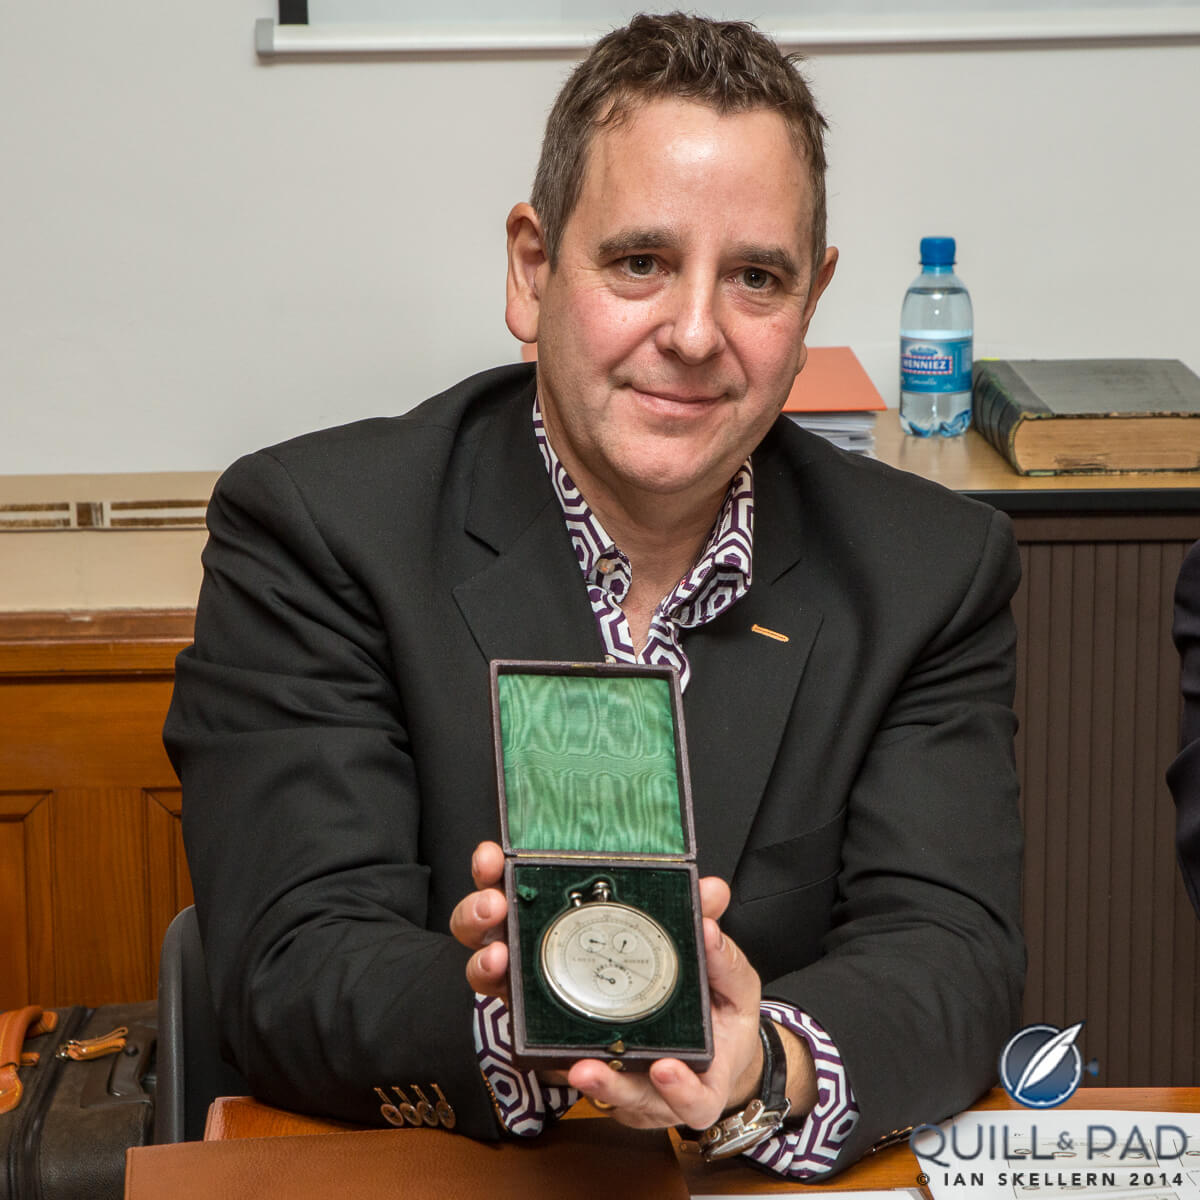 Jean-Marie Schaller, CEO and creative director of the modern Louis Moinet band, proudly holding the Compteur de Tierces